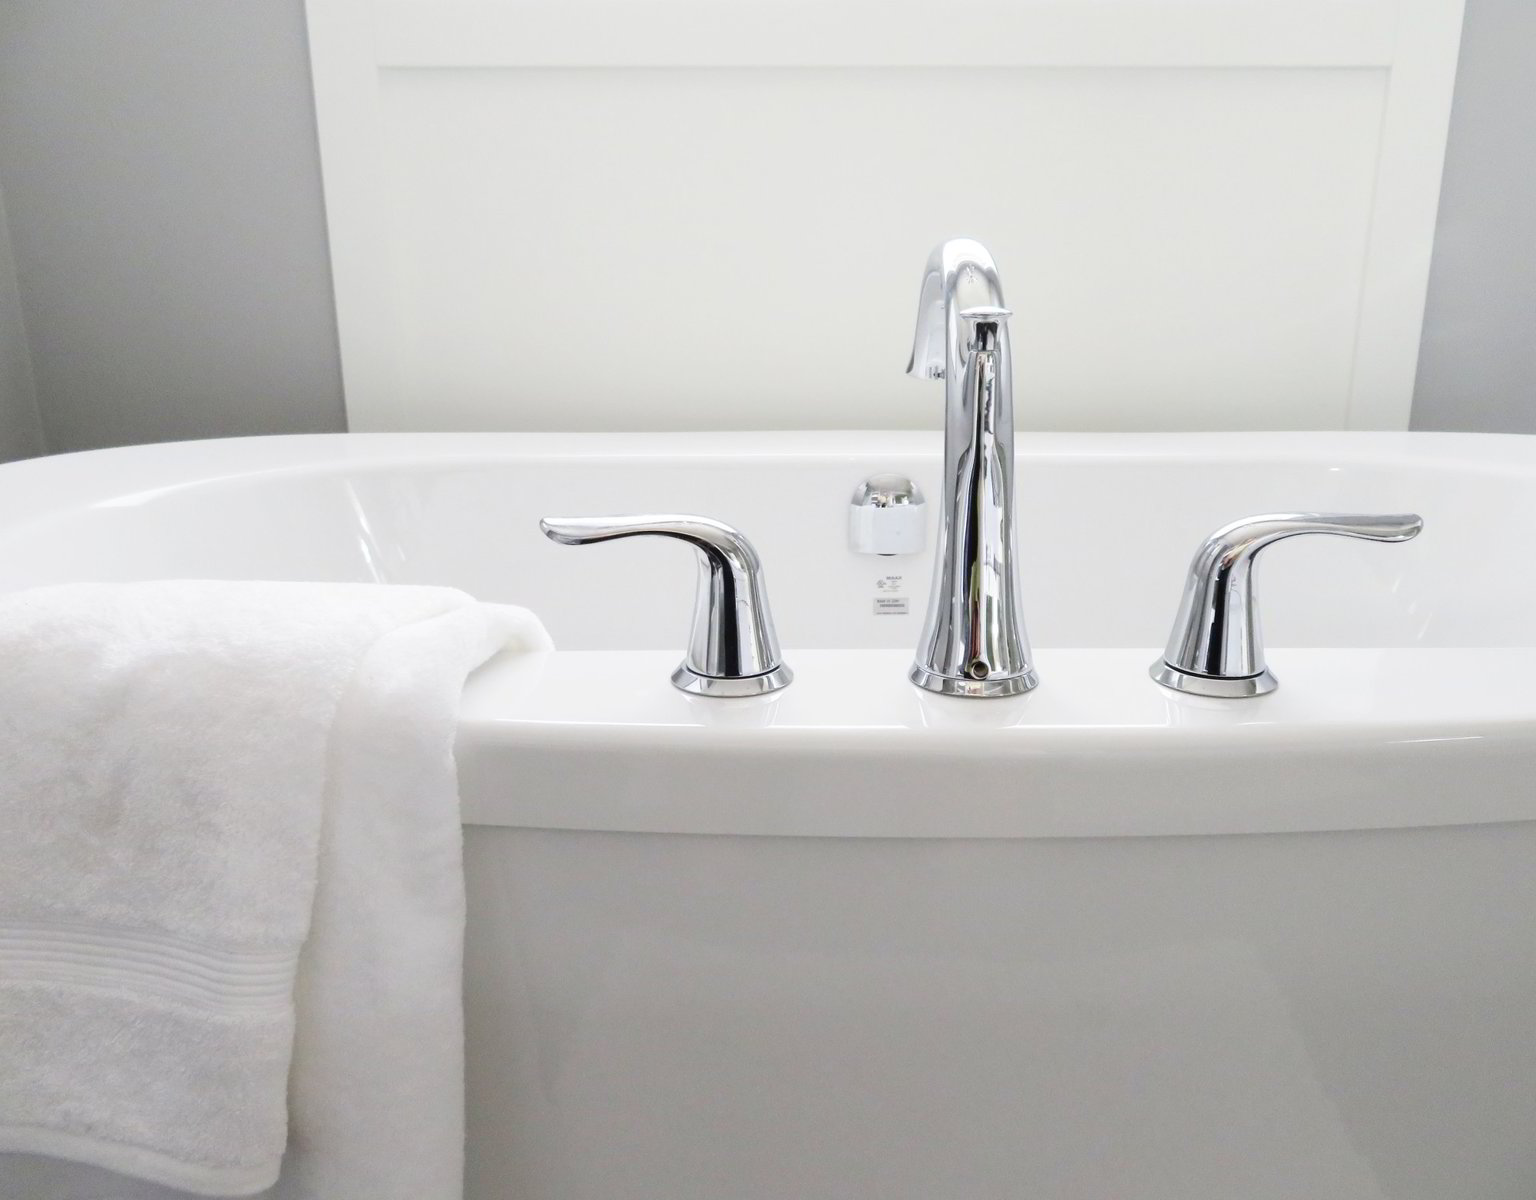 How To Fix A Leaky Bathtub Faucet, Bathtub Faucet Replacement